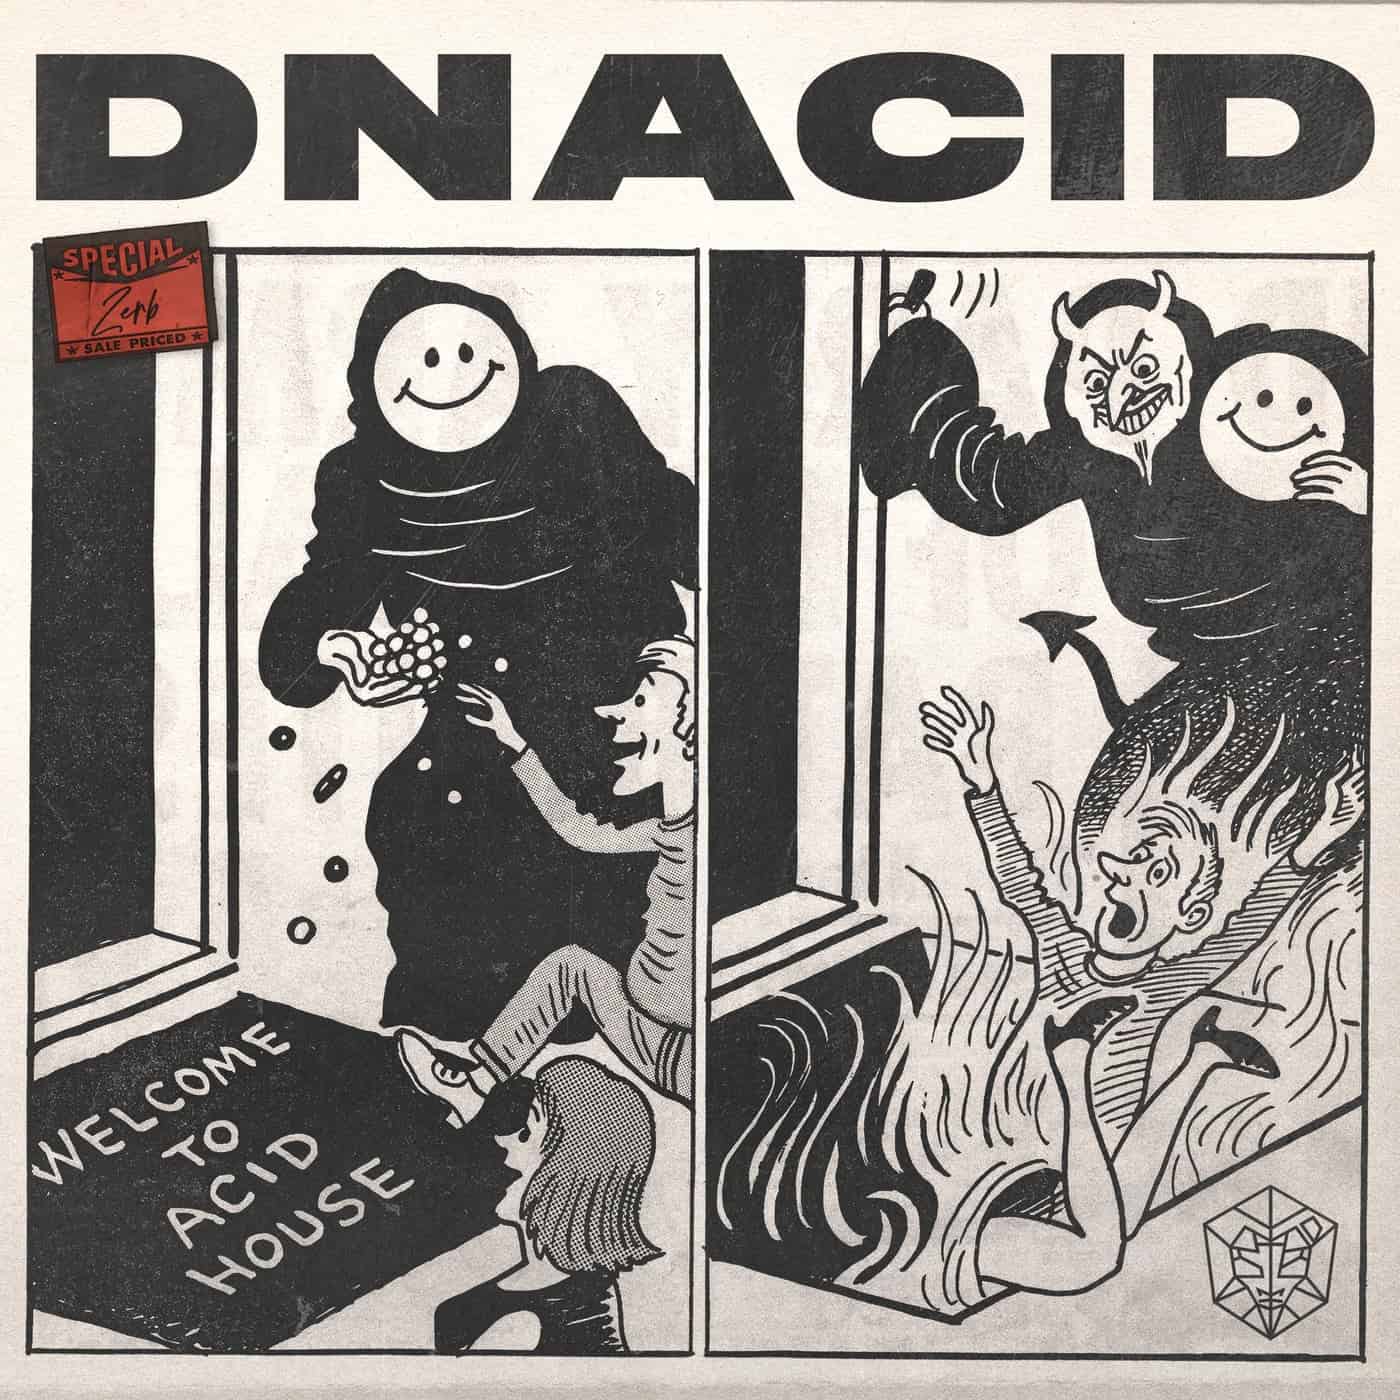 Download DNACID - Extended Mix on Electrobuzz